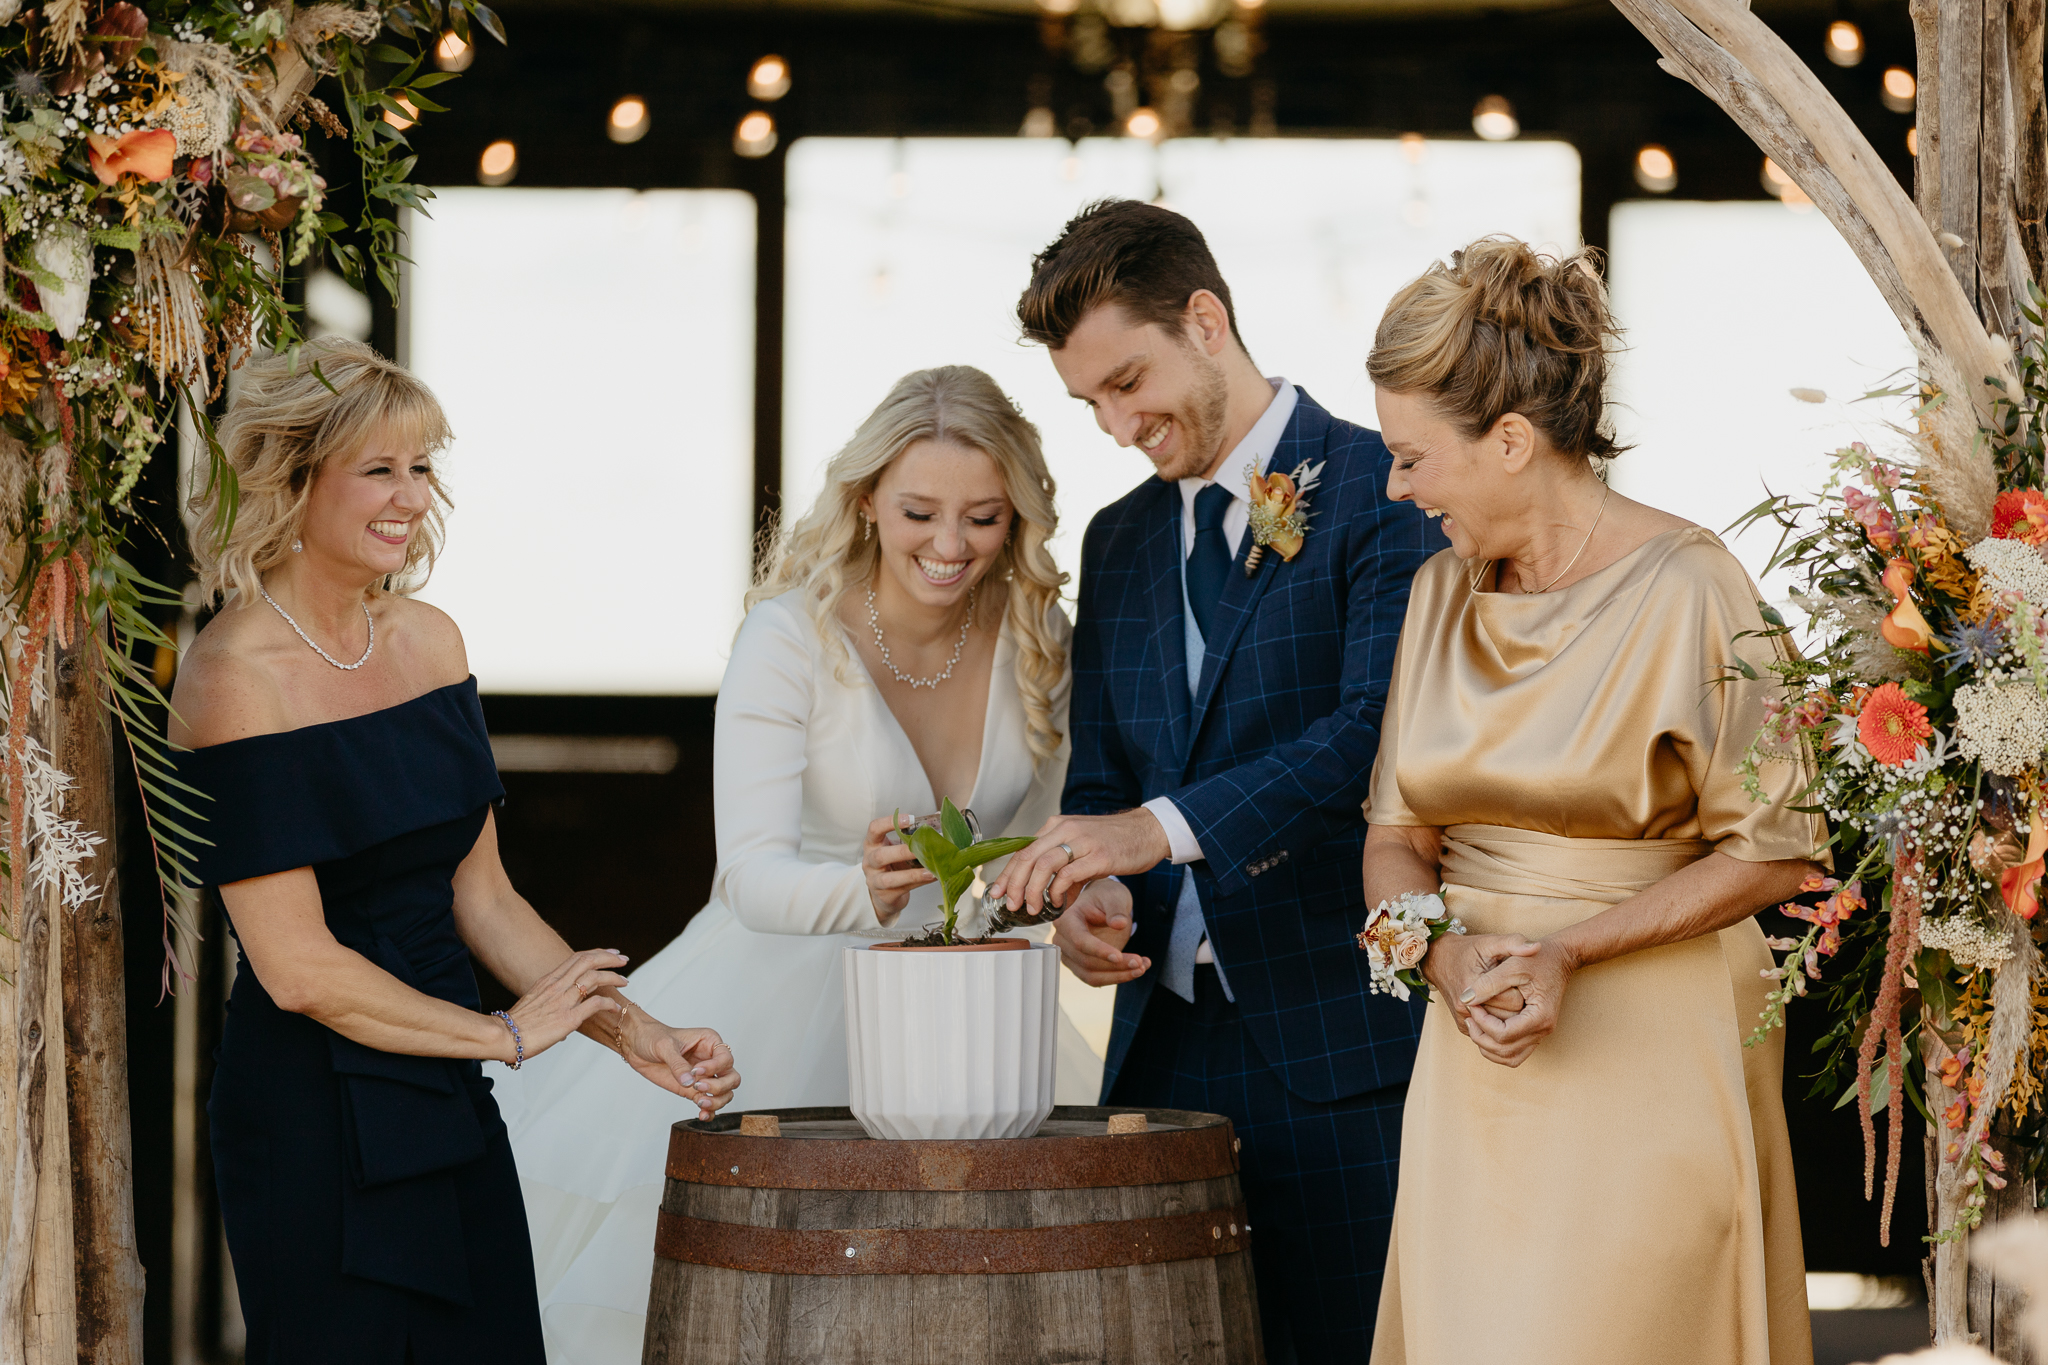 Bride, Groom, and mothers pour soil into a plant at the altar of an outdoor wedding ceremony